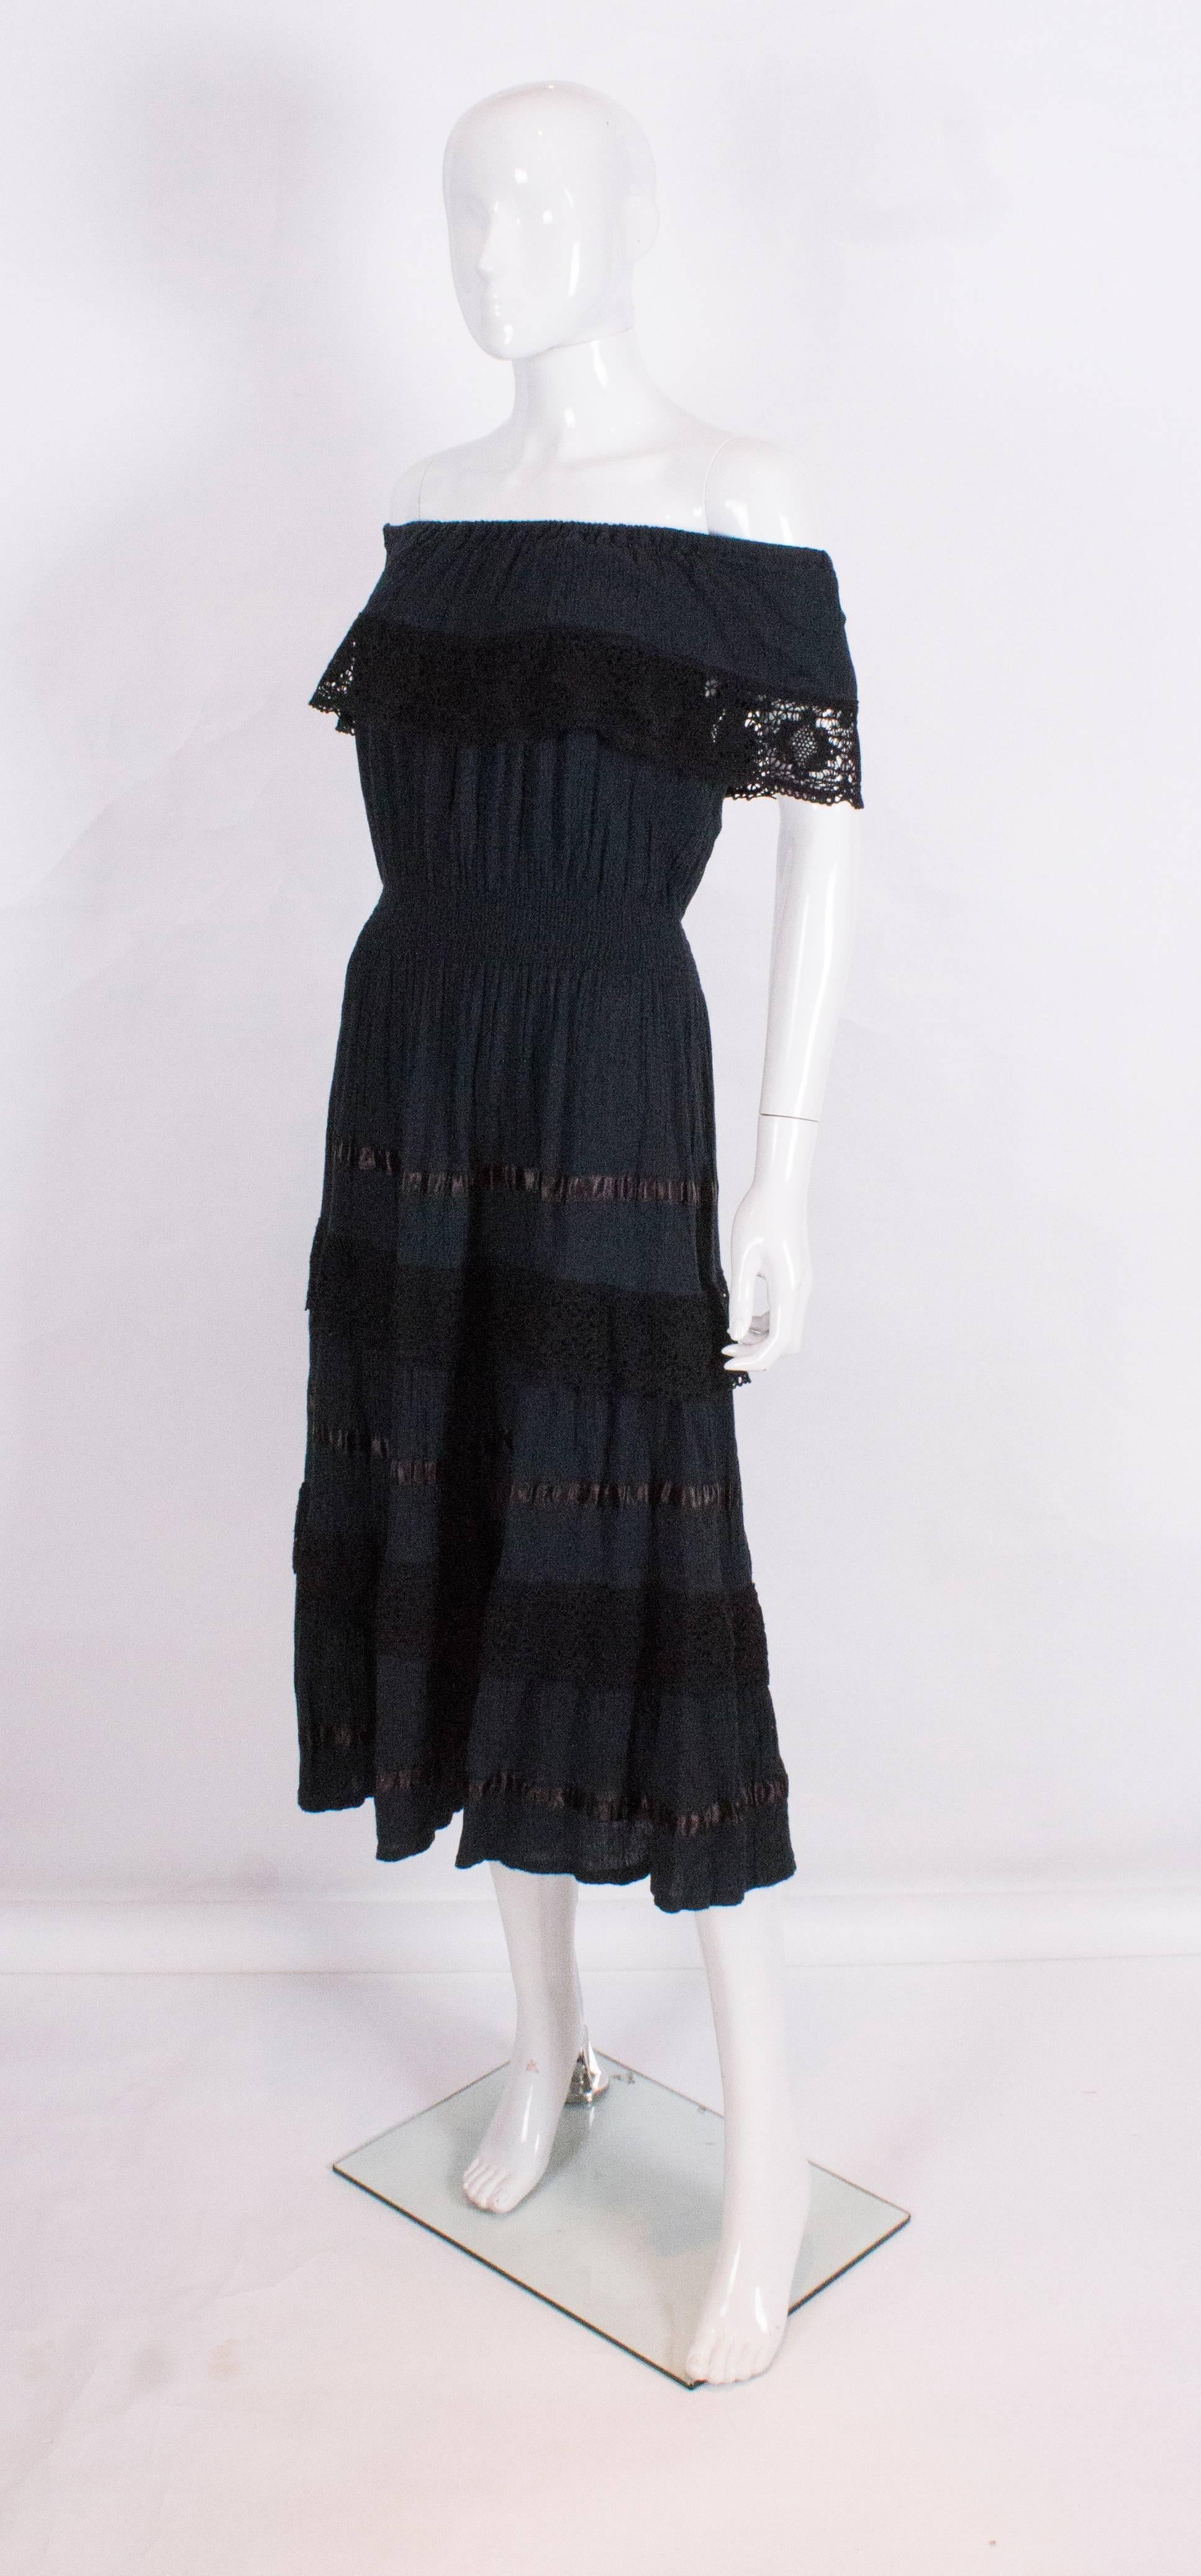 A chic cotton black on/off shoulder dress with an elasticated waist, flared skirt with ribbon and crochet detail. Perfect for summer. The waist measure 22'', but as it is elasticated, can stretch.